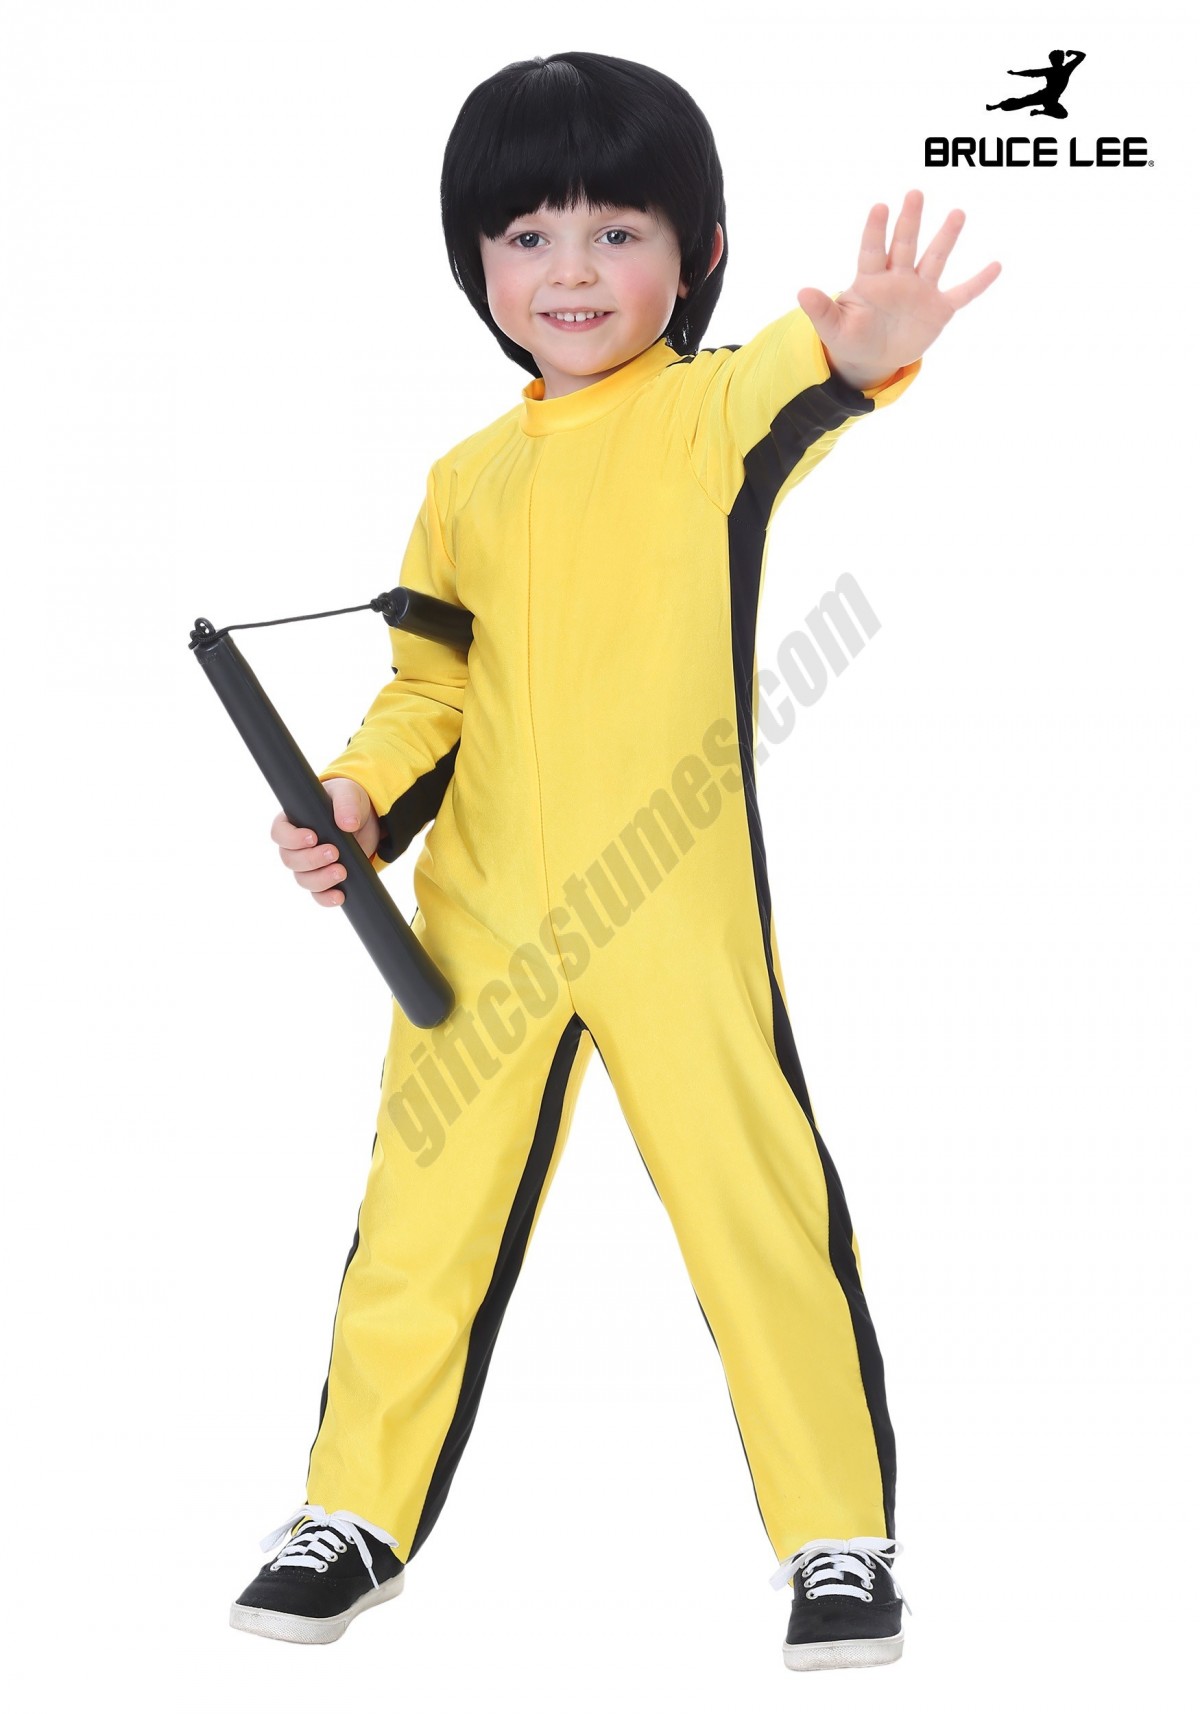 Bruce Lee Toddler Costume Promotions - -0